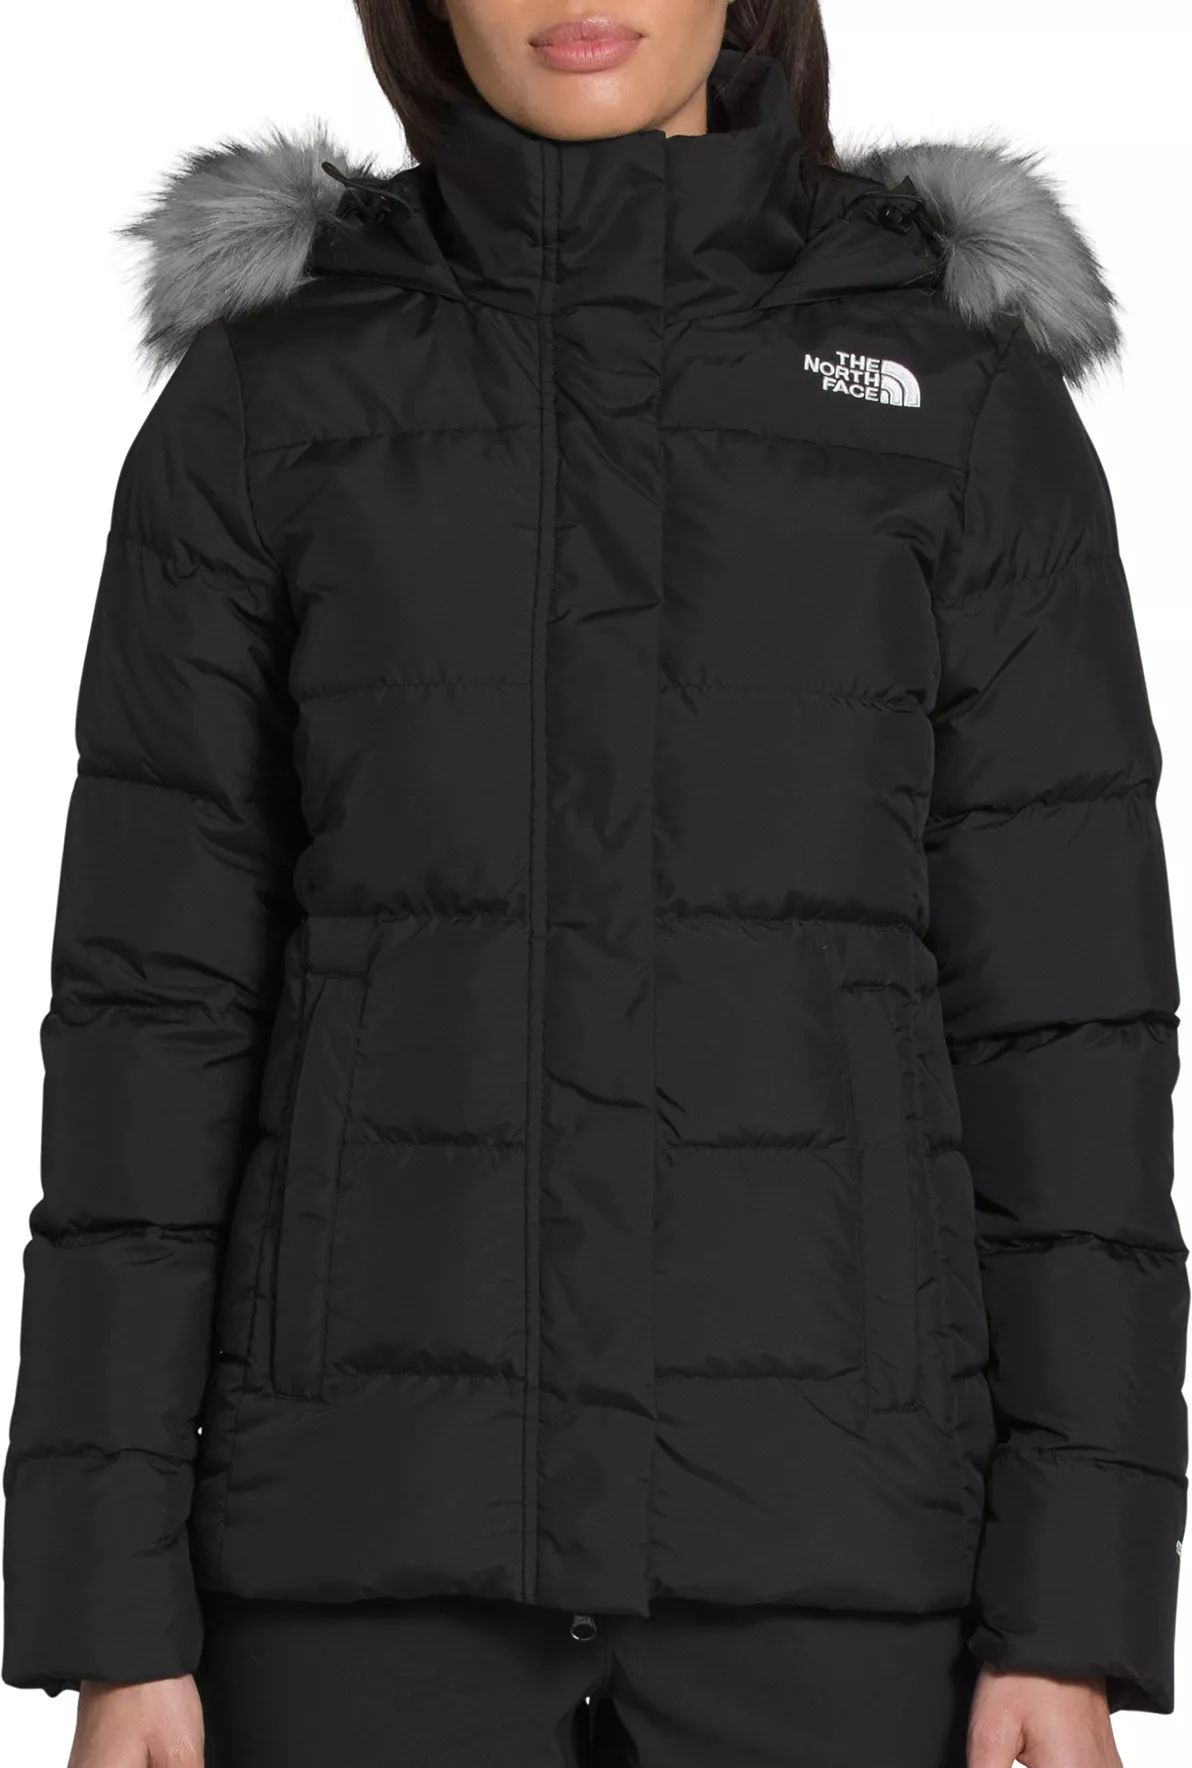 The North Face Women's Gotham Jacket, Small, Tnf Black | Dick's Sporting Goods